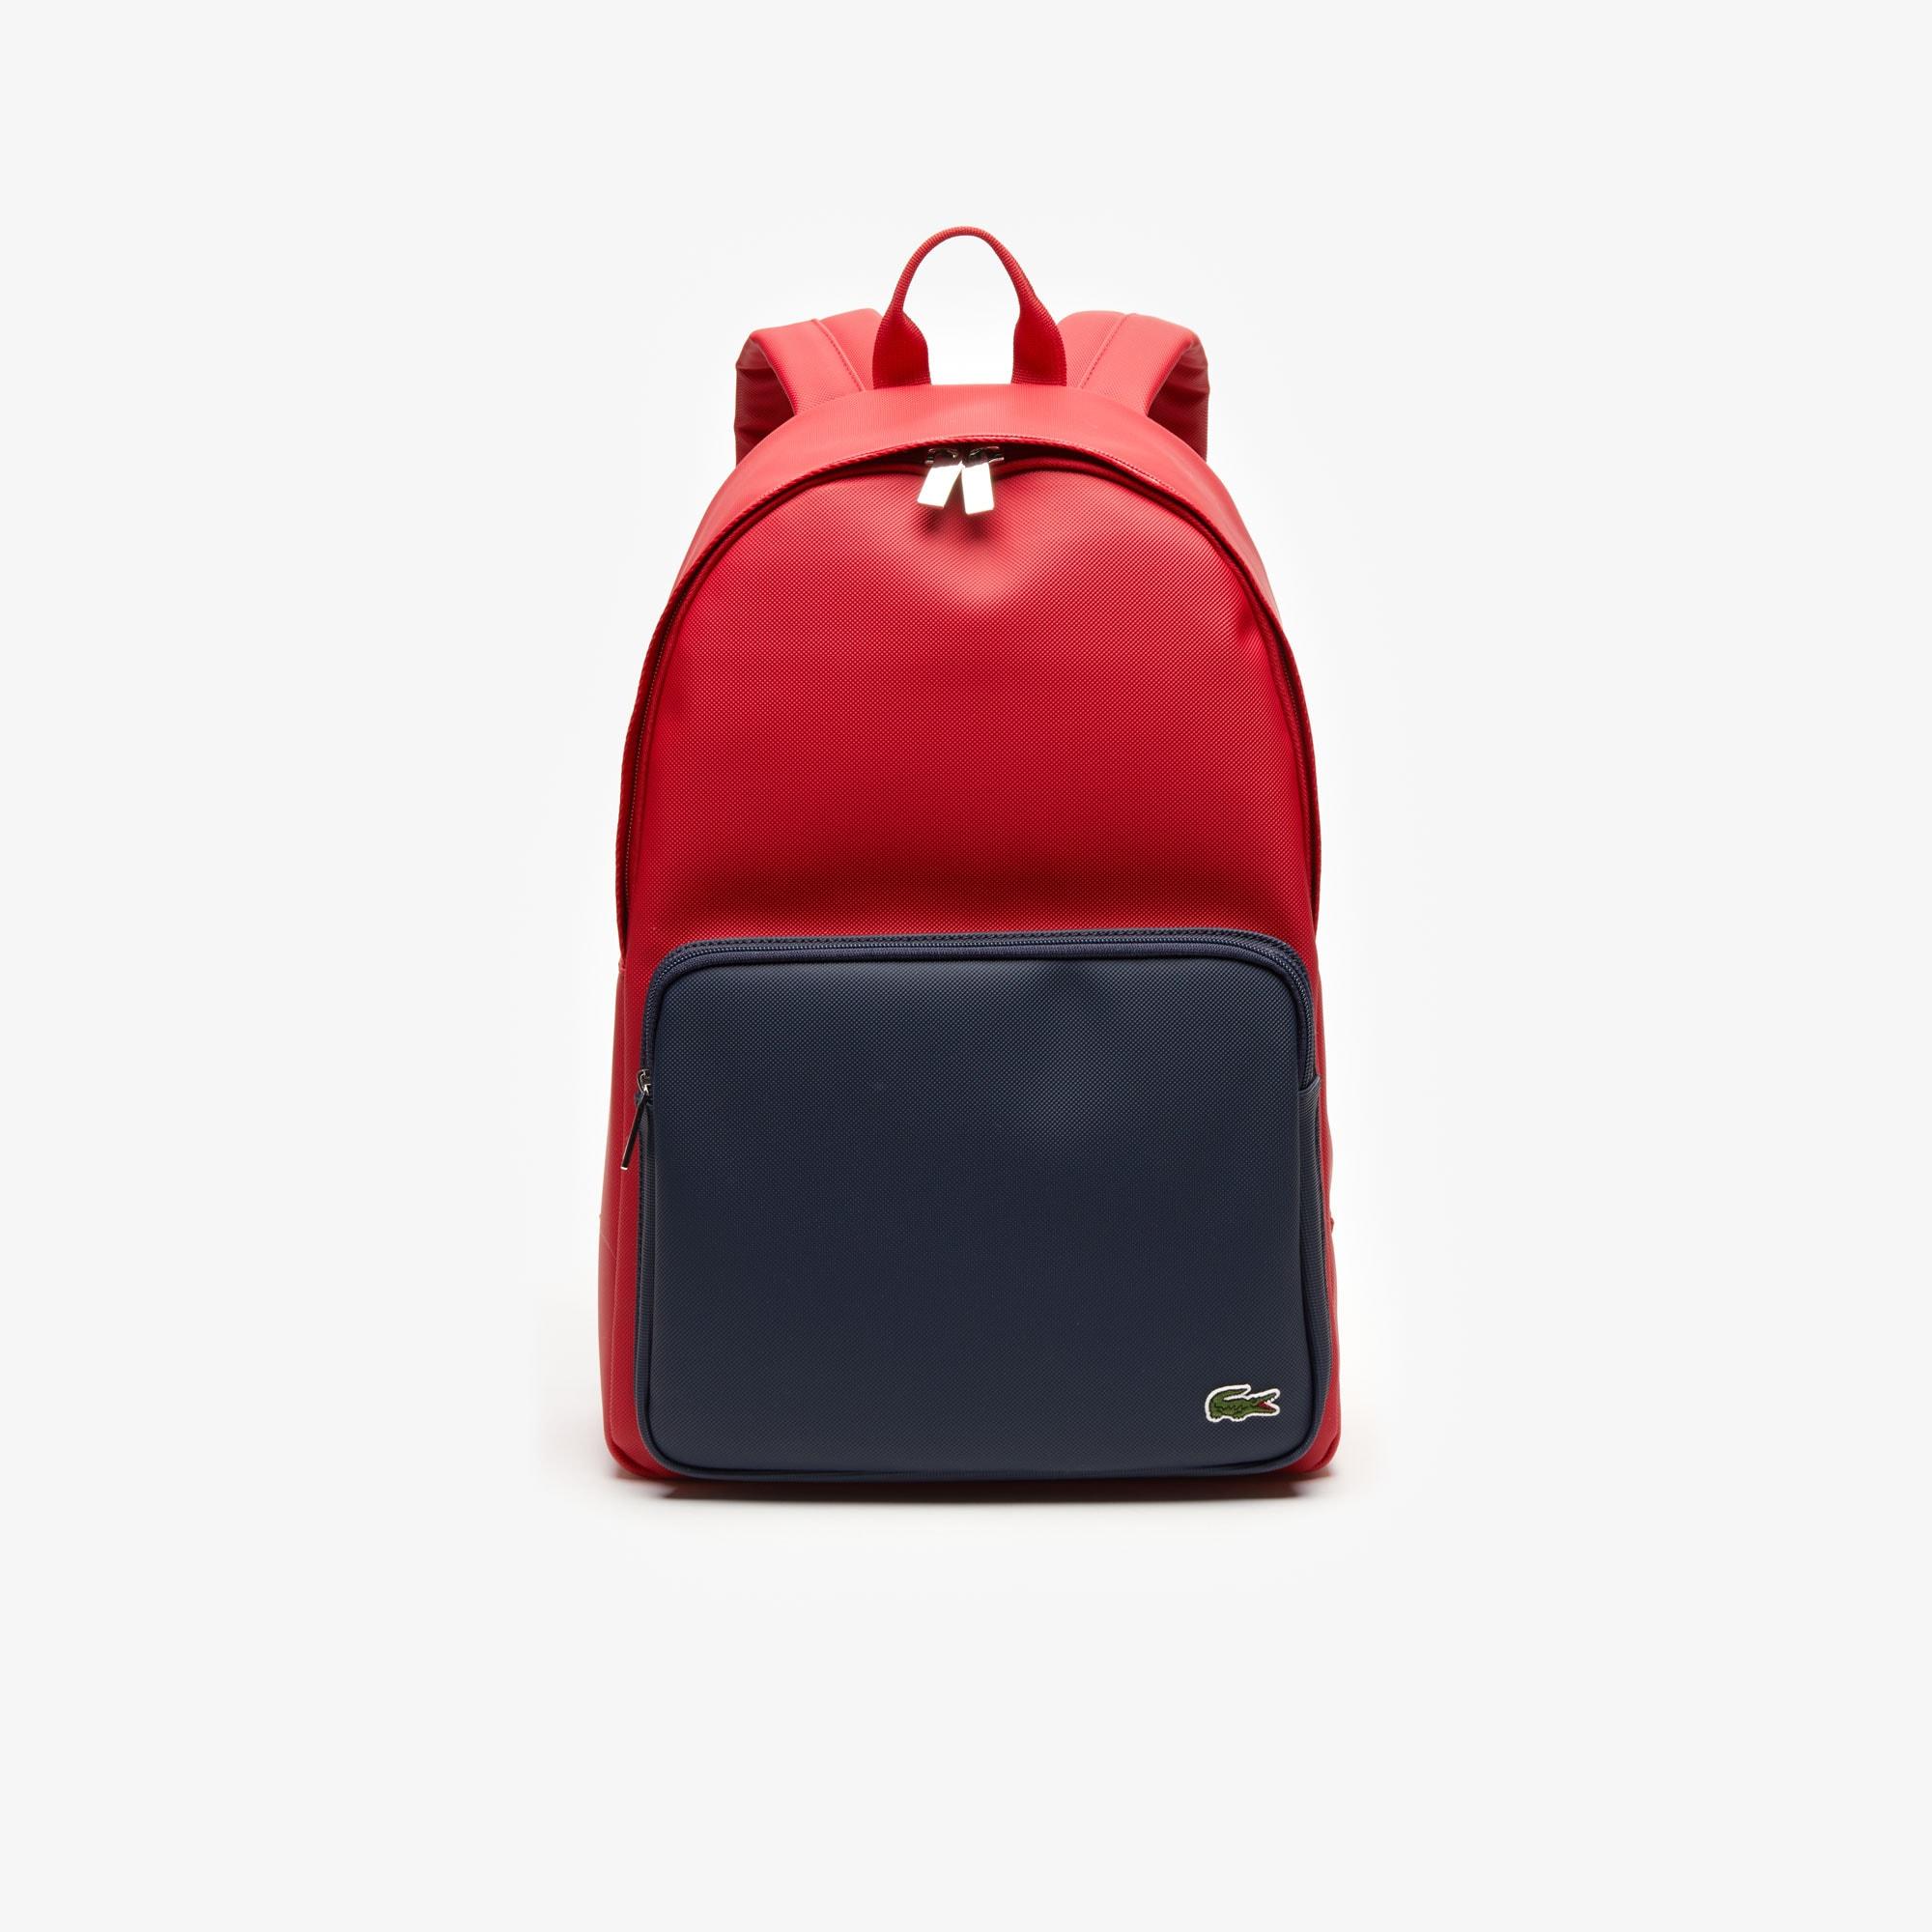 lacoste bags backpack